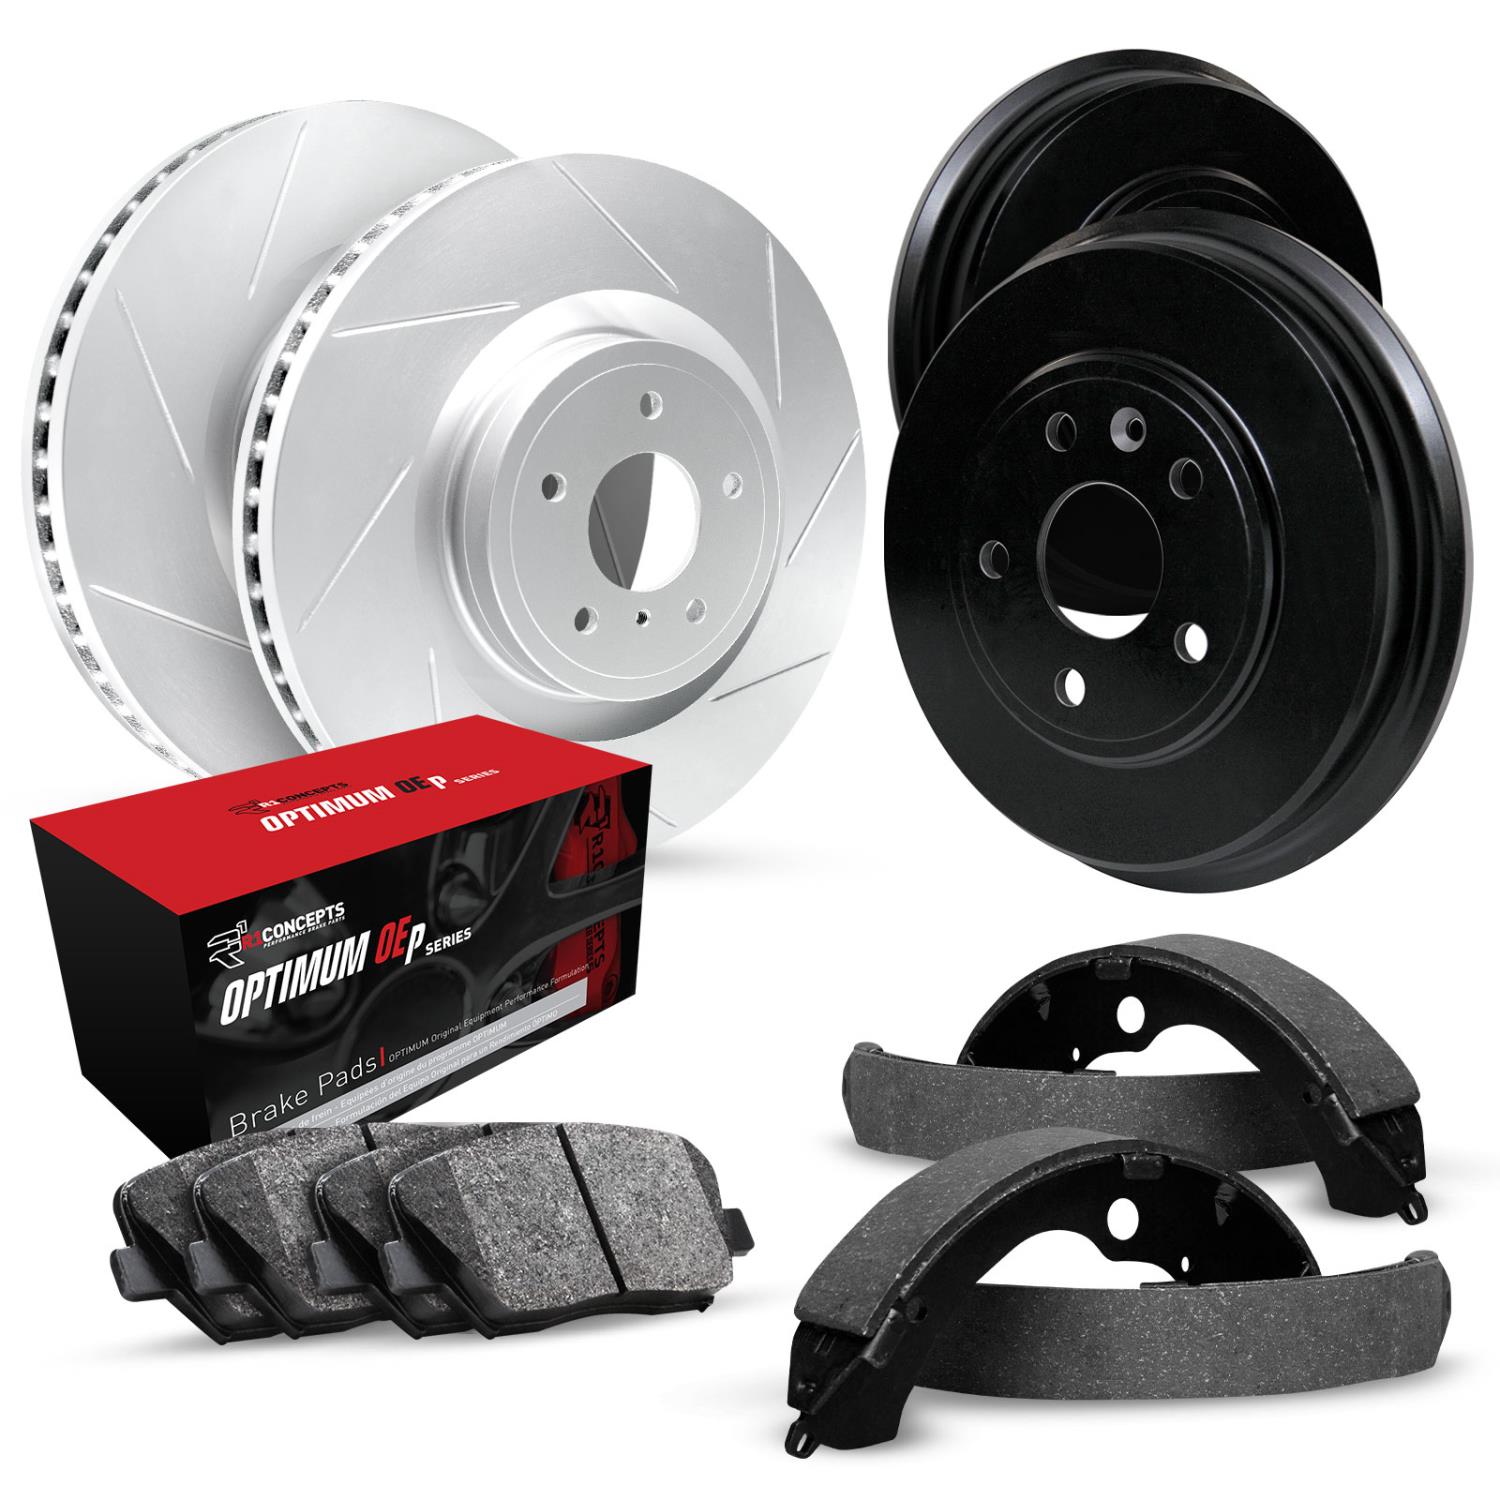 GEO-Carbon Slotted Brake Rotor & Drum Set w/Optimum OE Pads & Shoes, 1992-1996 GM, Position: Front & Rear